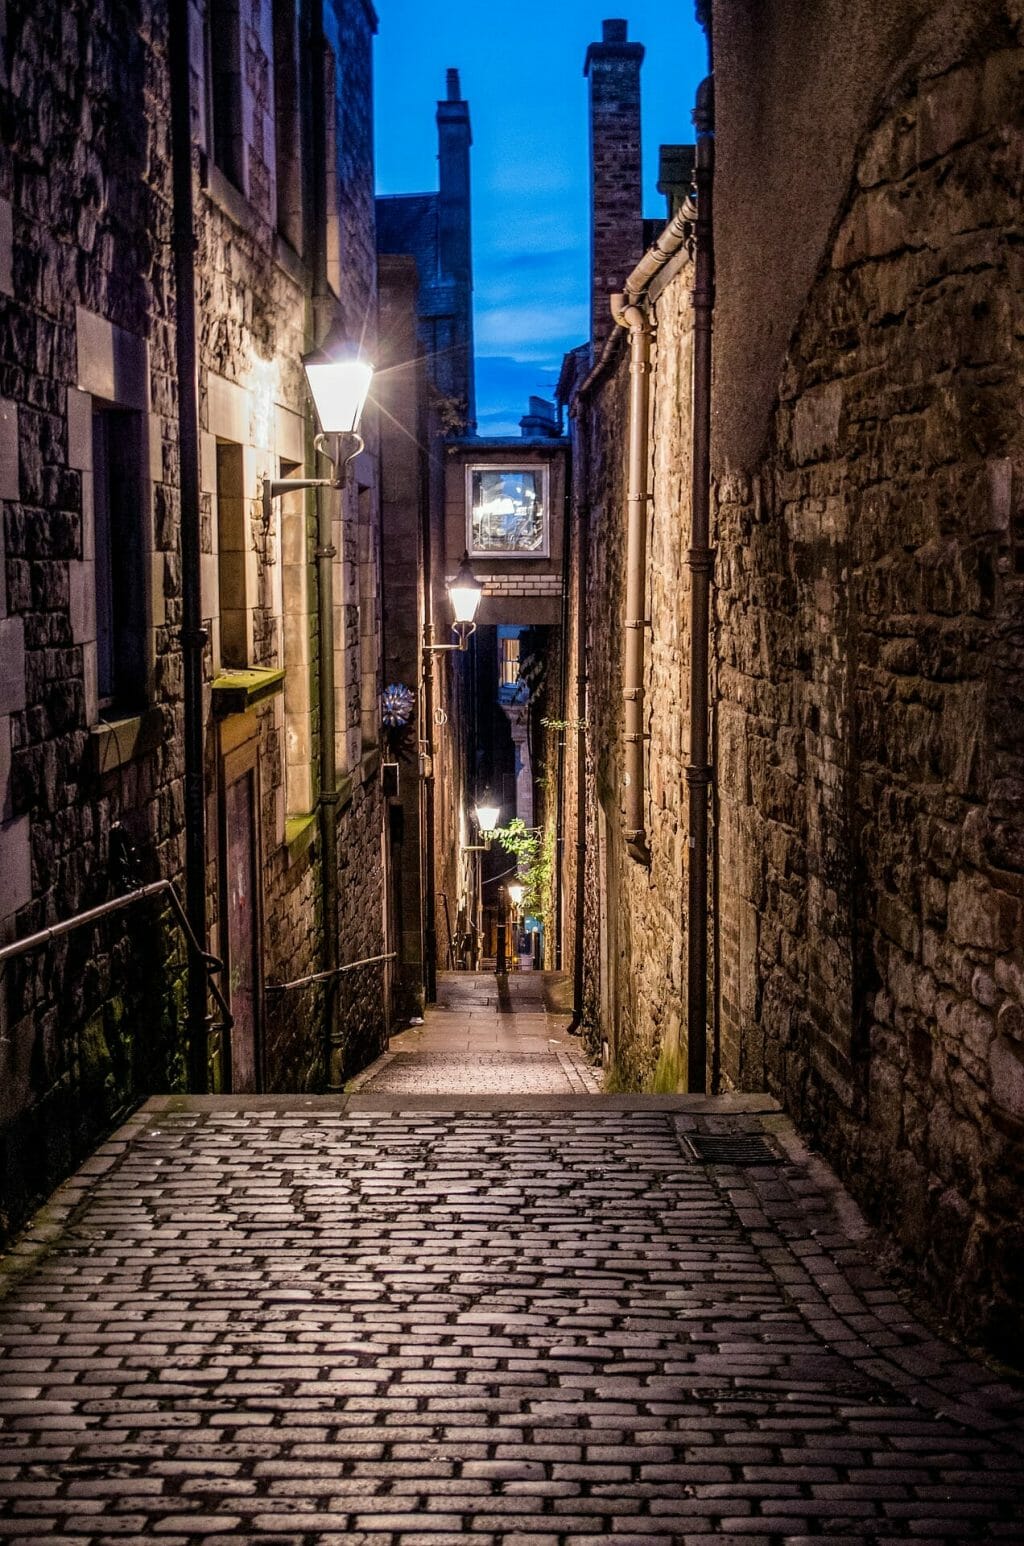 Cobblestone alley in Edinburgh in the evening with a lamp glowing with light